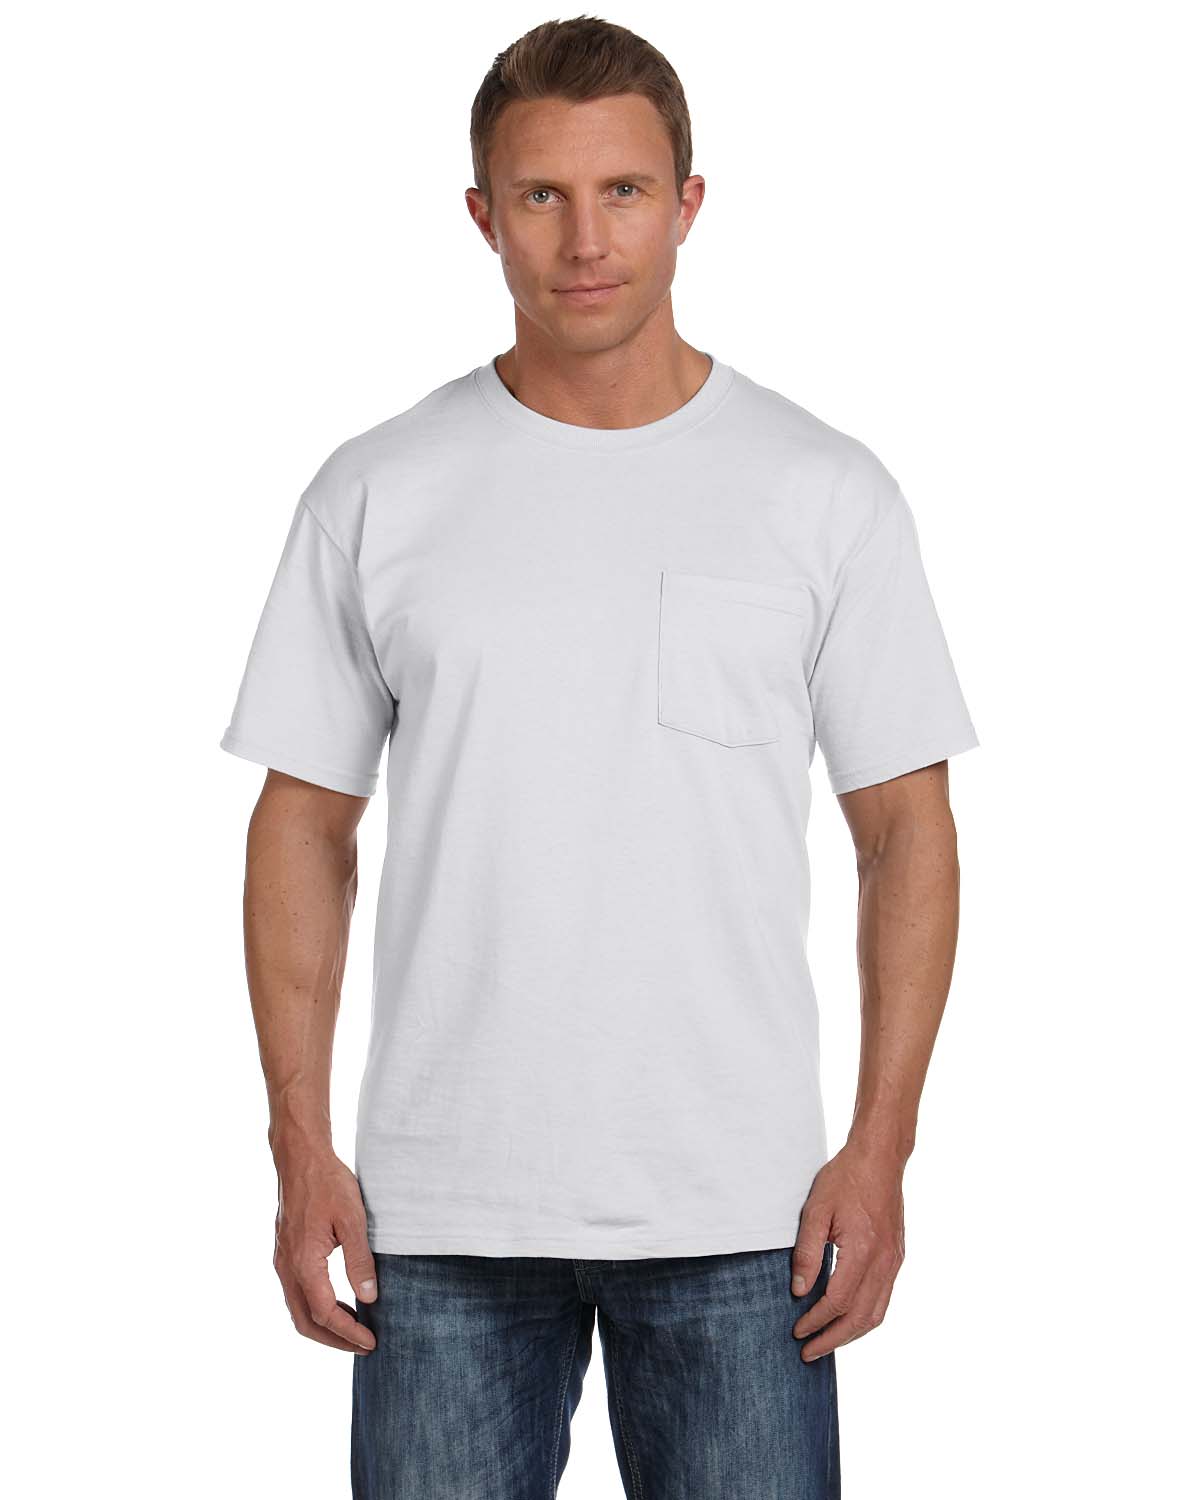 Dance now fruit of the loom platinum t shirt mens can that are